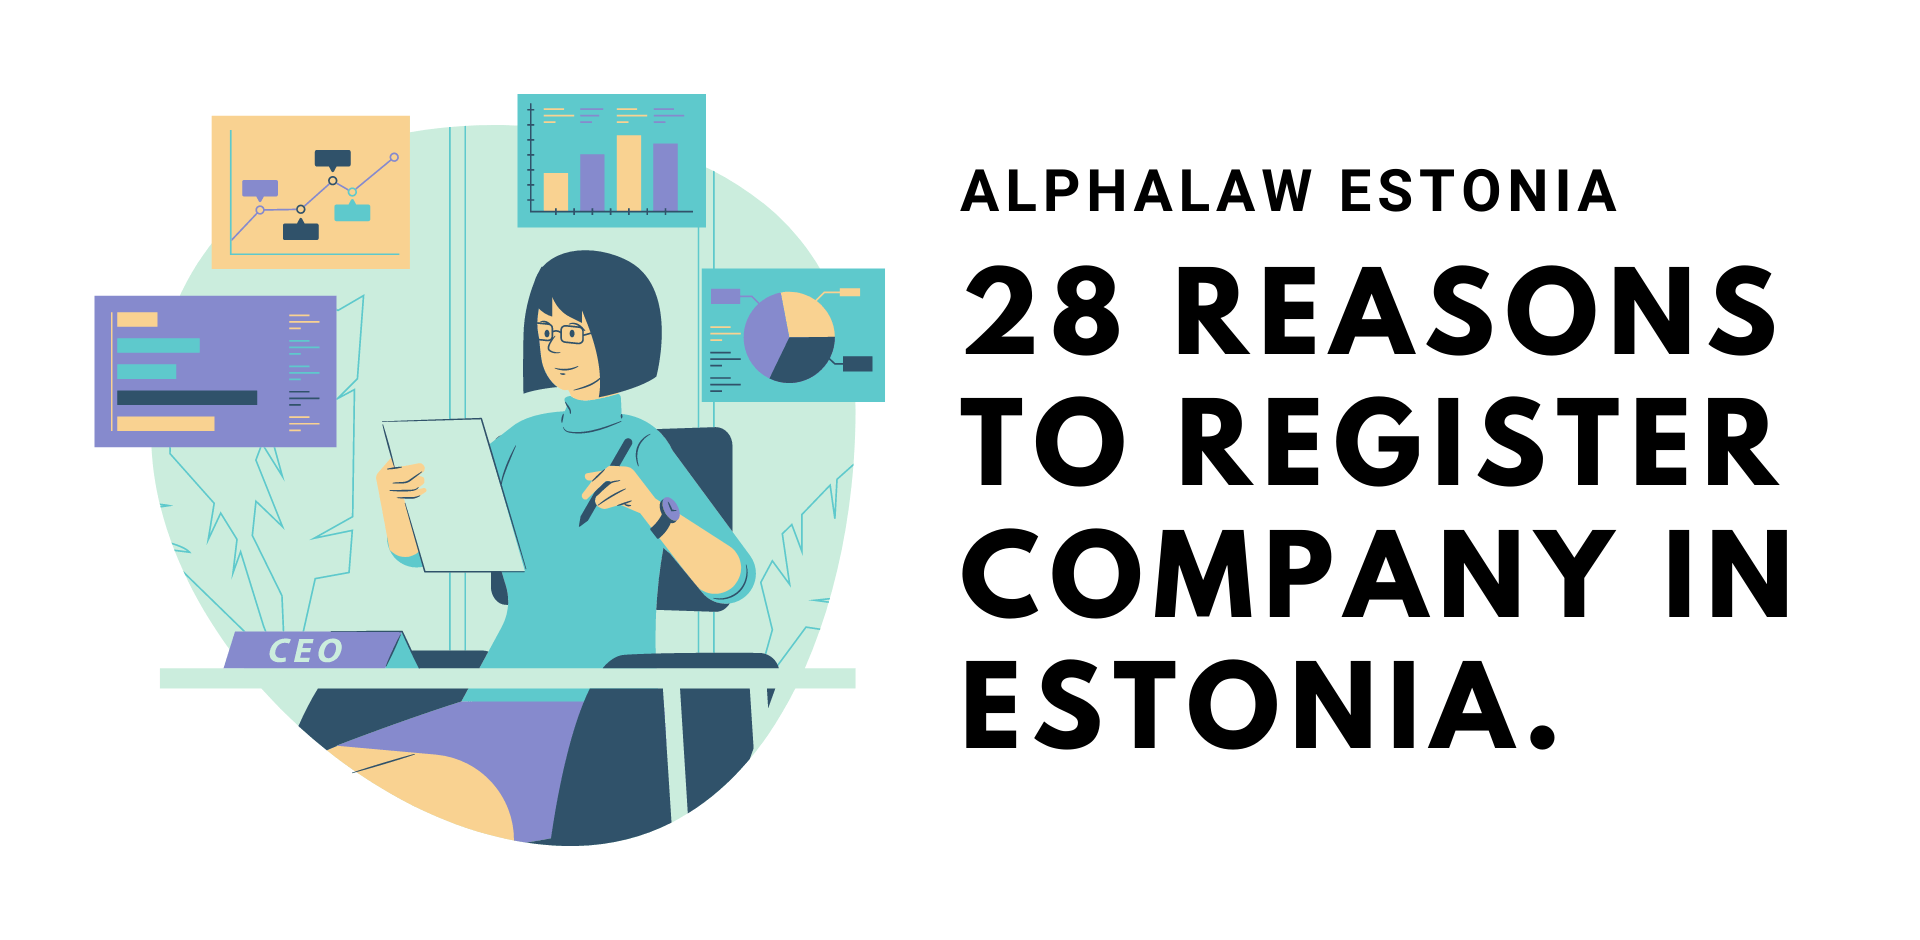 Register Company in Estonia. Why? Here is 28 reasons.